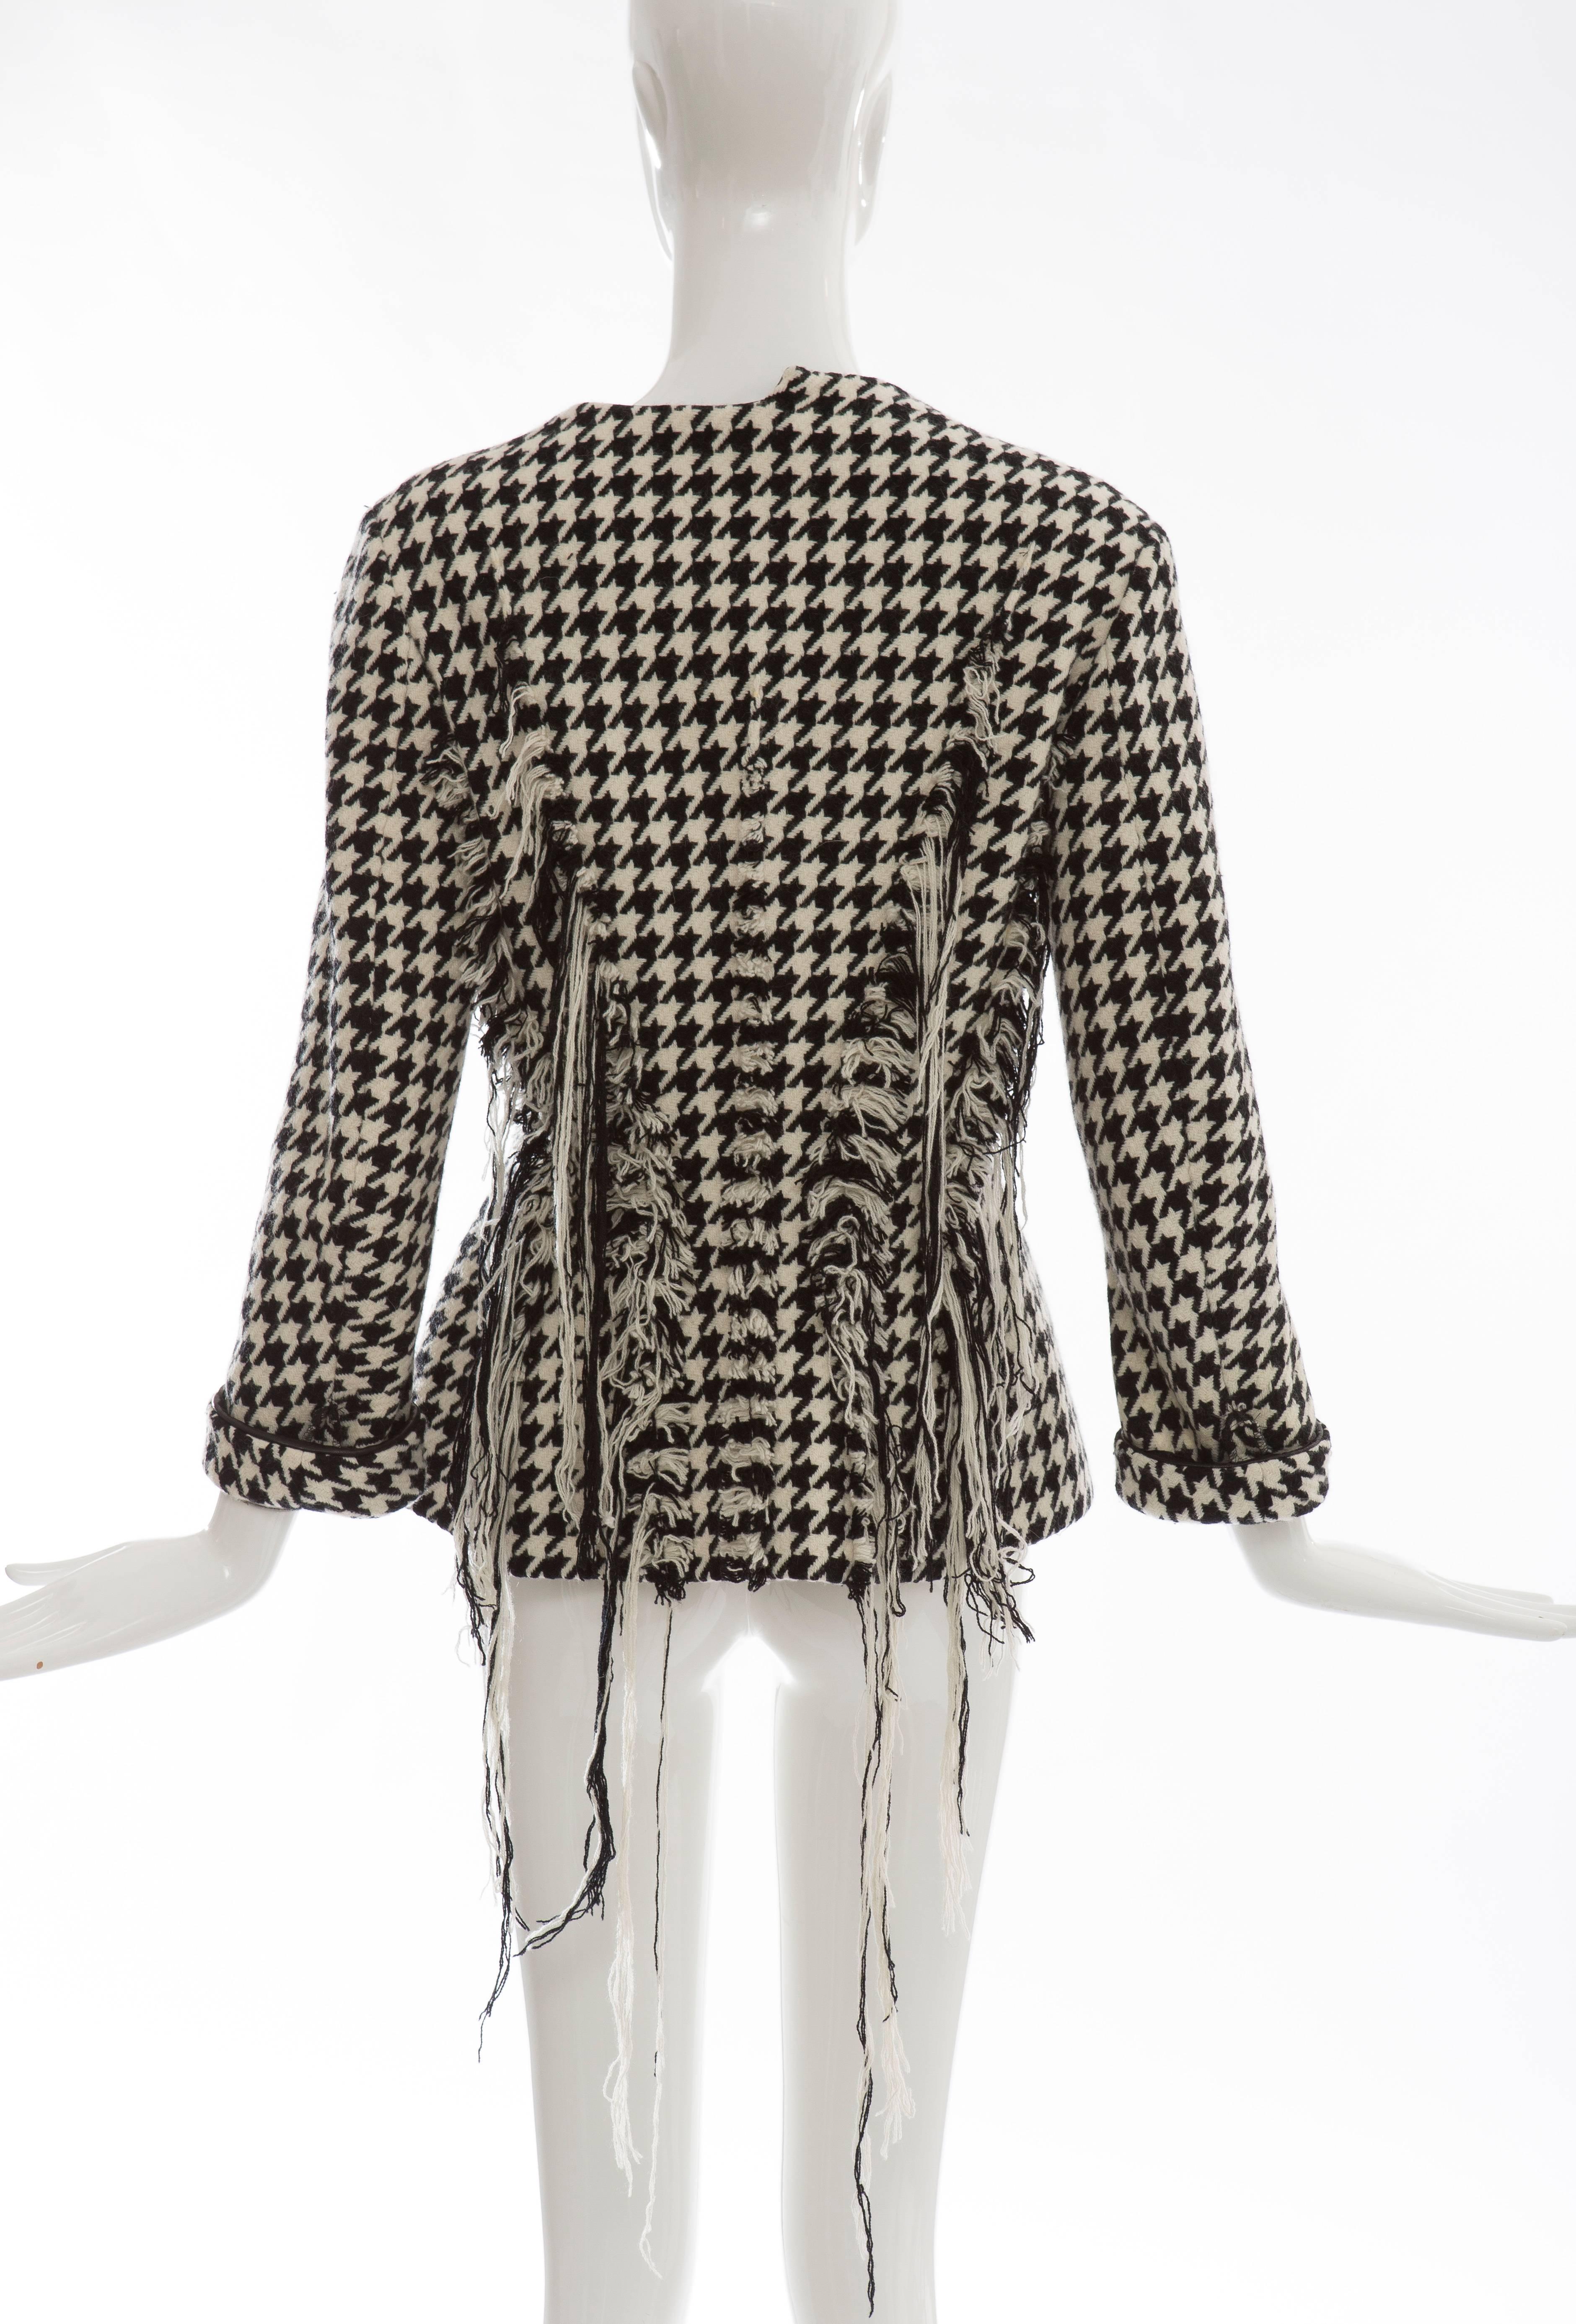 Yohji Yamamoto Wool Houndstooth Jacket With Leather Trim, Autumn / Winter 2003 In Excellent Condition For Sale In Cincinnati, OH